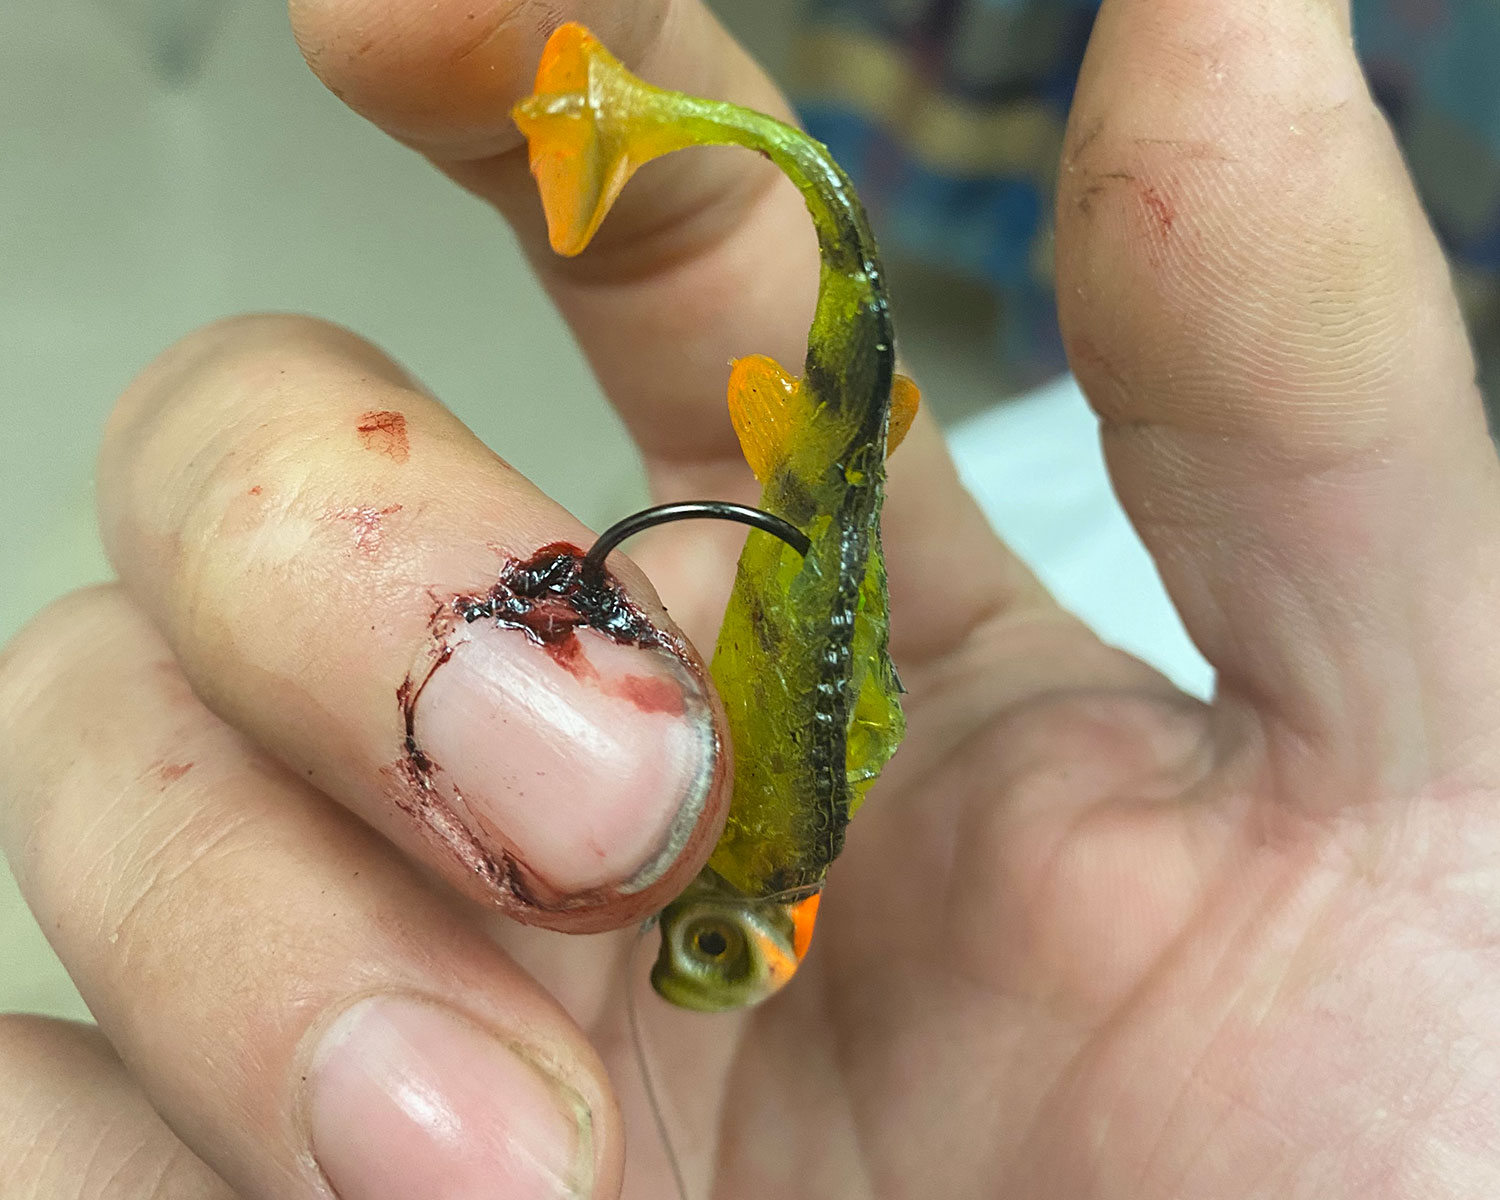 Finger with fish hook caught by nail